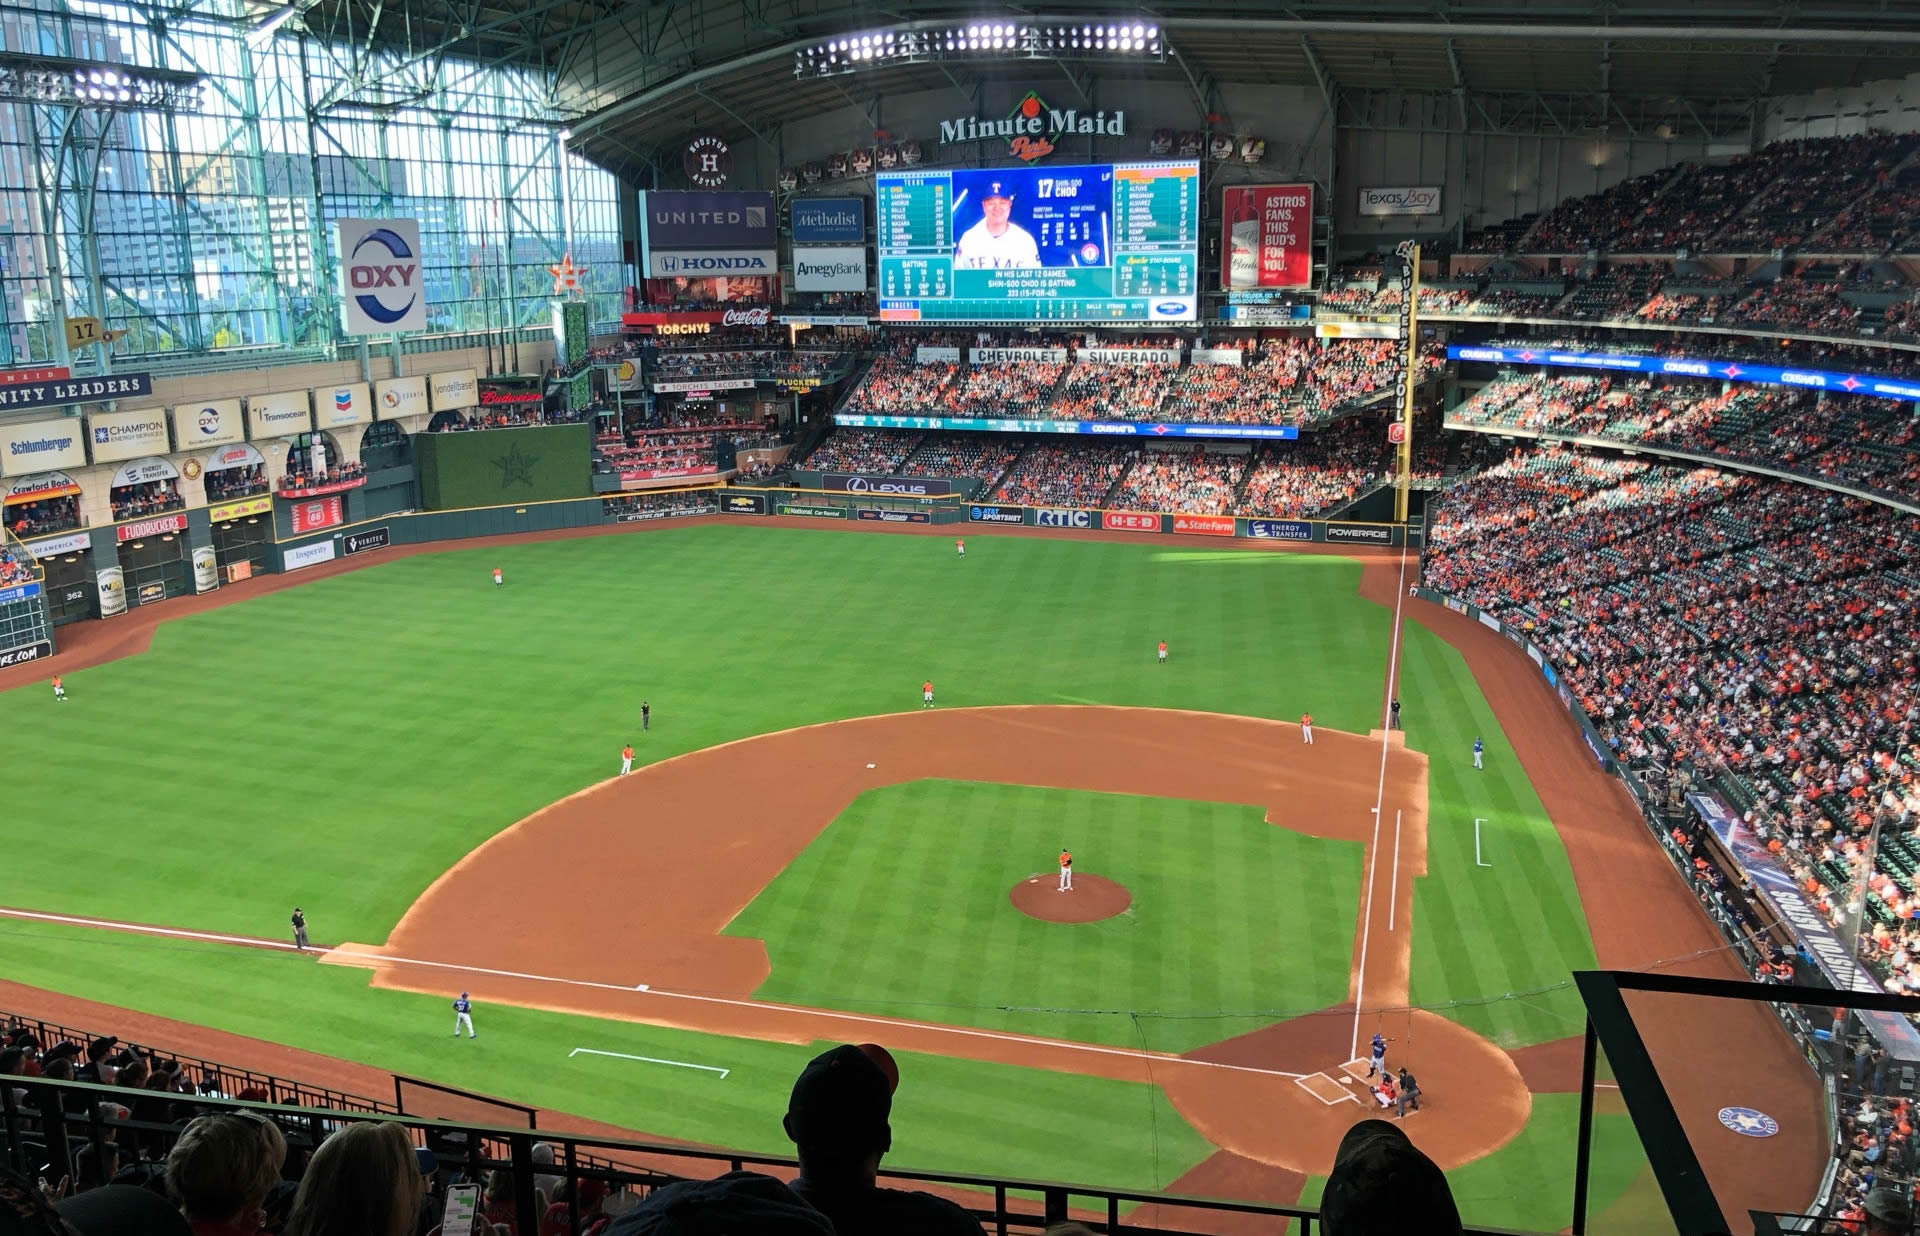 Section 415 at Minute Maid Park 